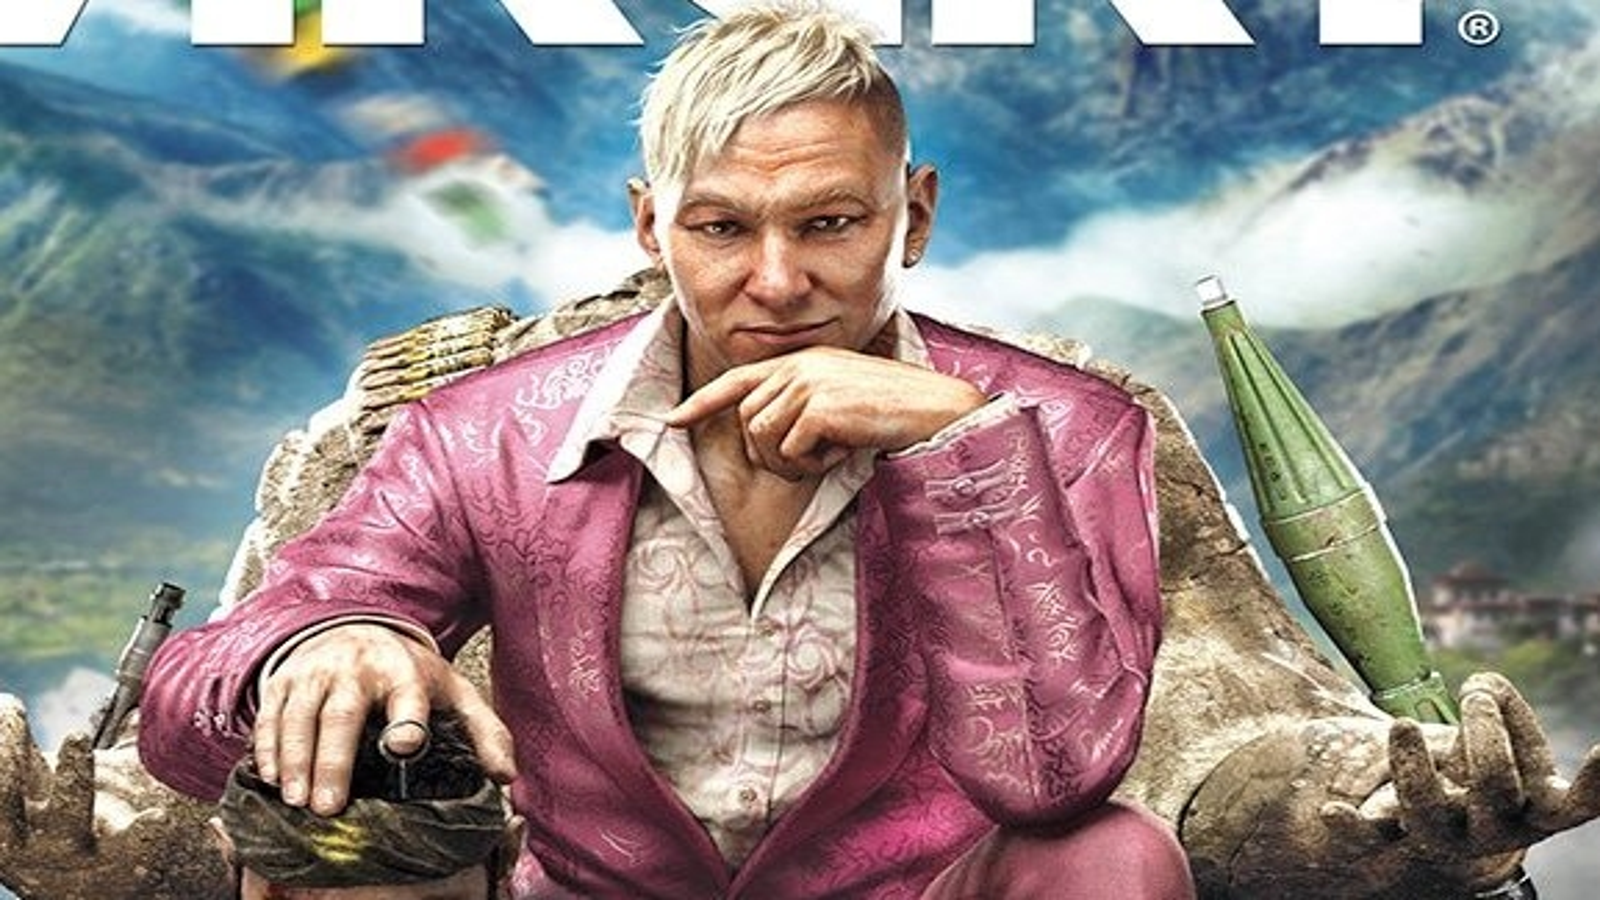 Pagan Min from Far Cry 4 Costume, Carbon Costume